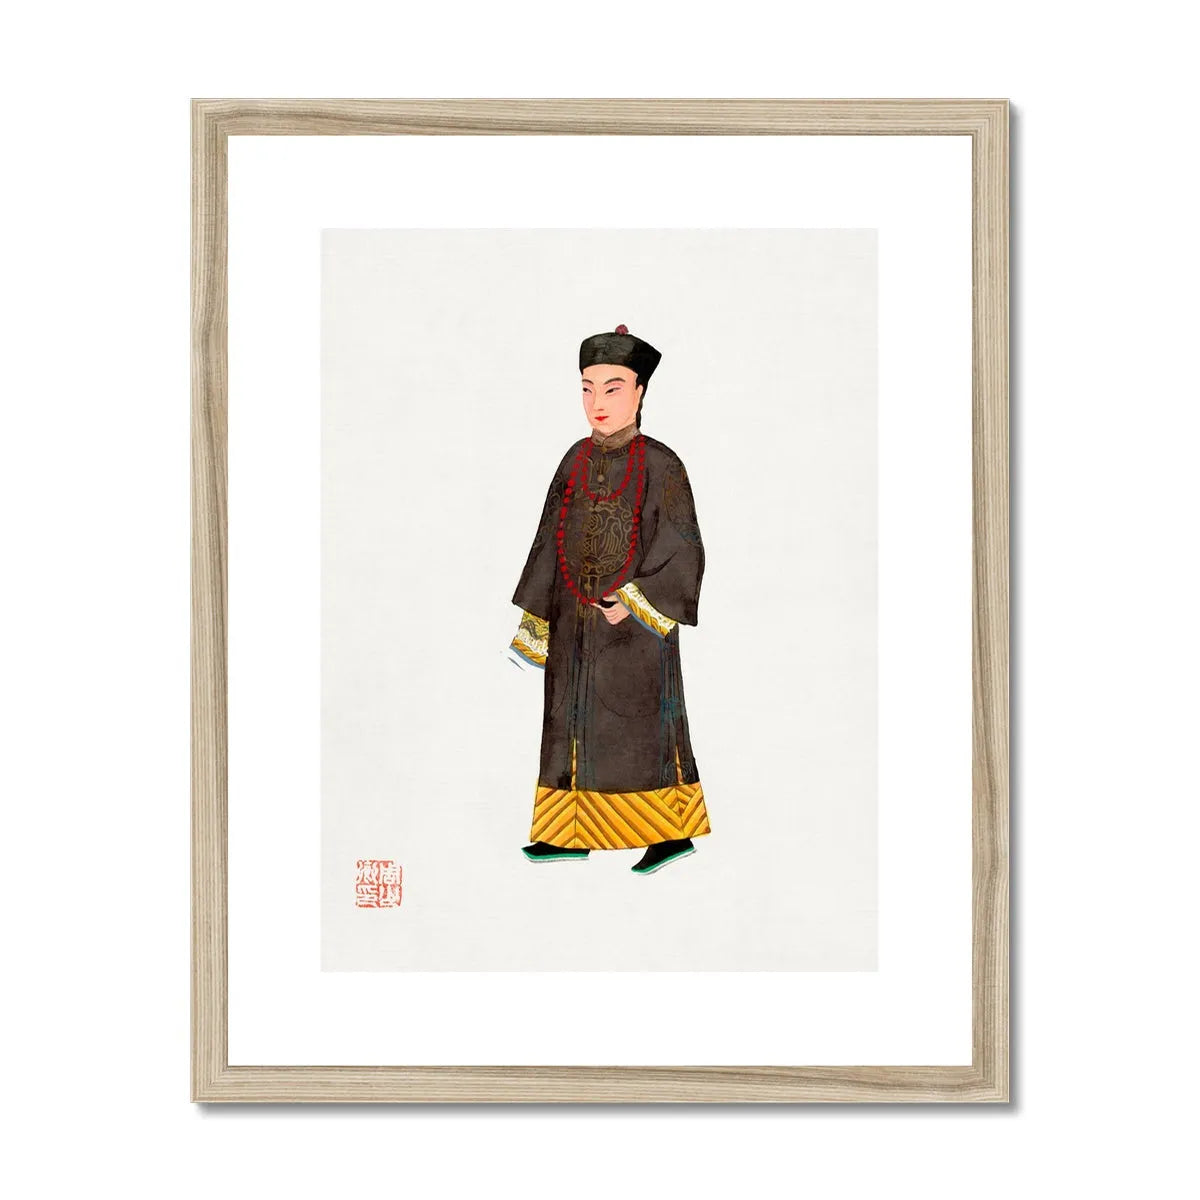 Chinese Emperor’s Courtier Framed & Mounted Print - 16’x20’ / Natural Frame - Posters Prints & Visual Artwork